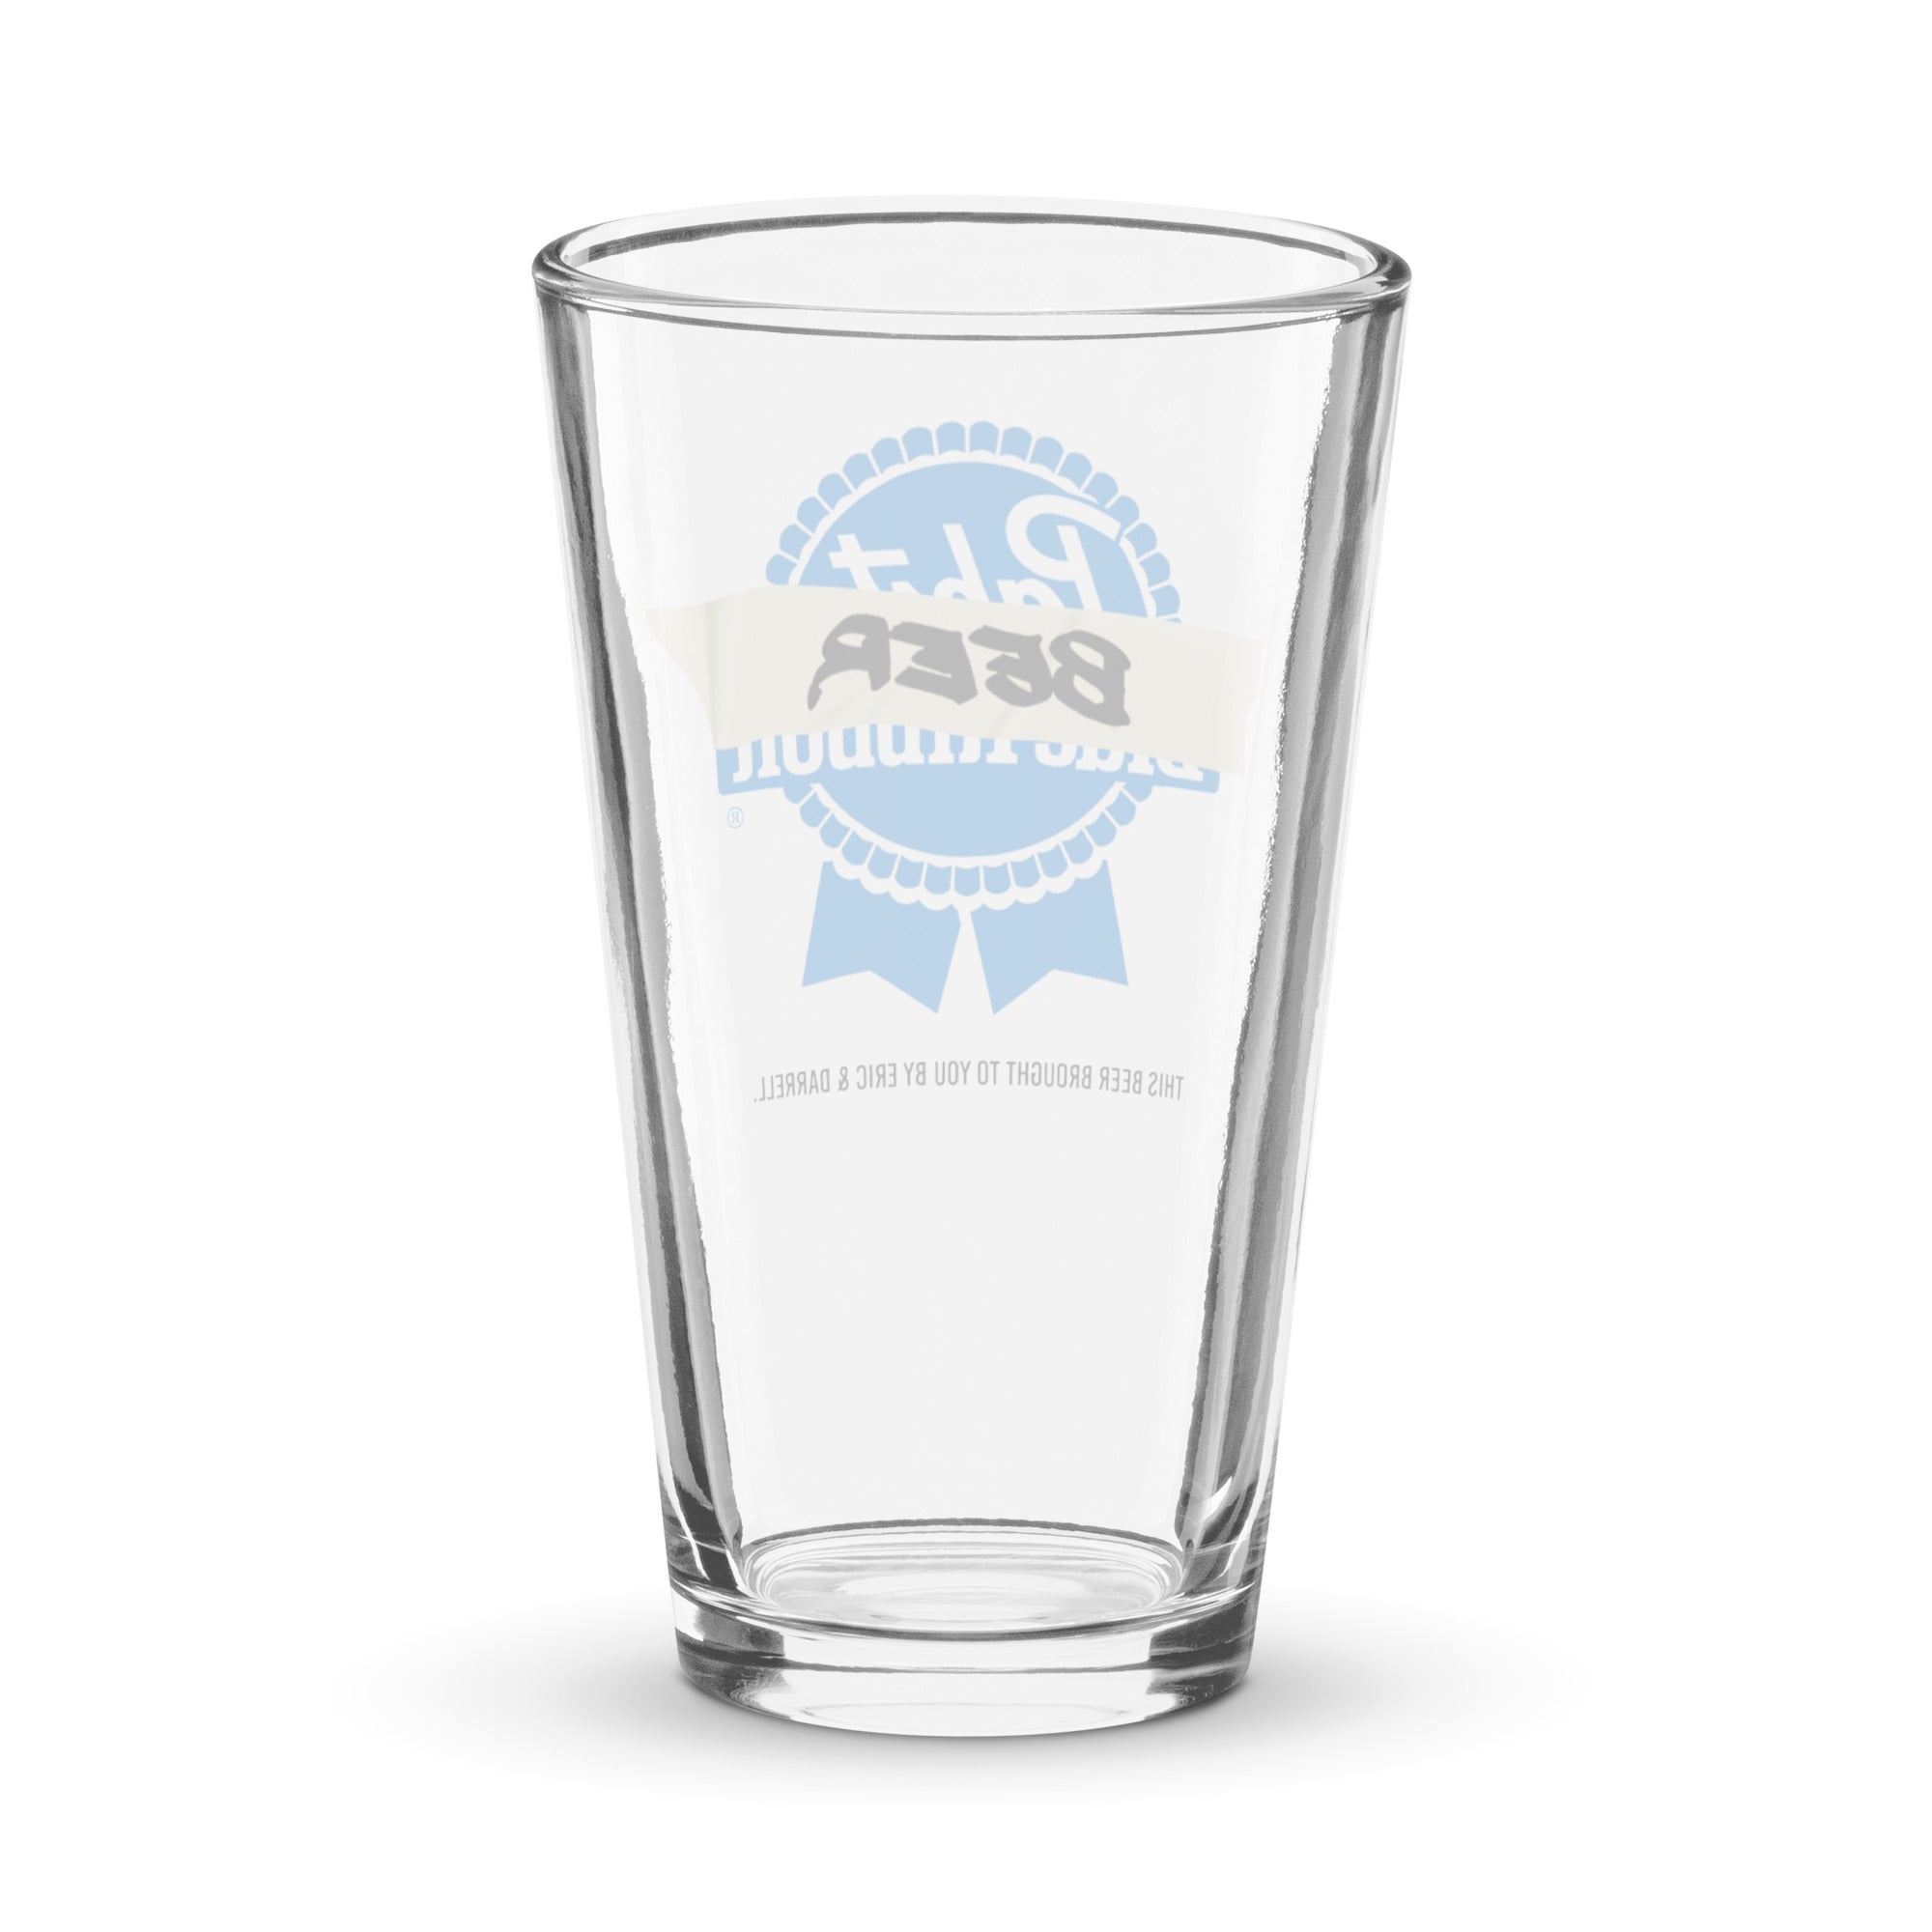 "Greeked" Beer Glass - The Ribbon